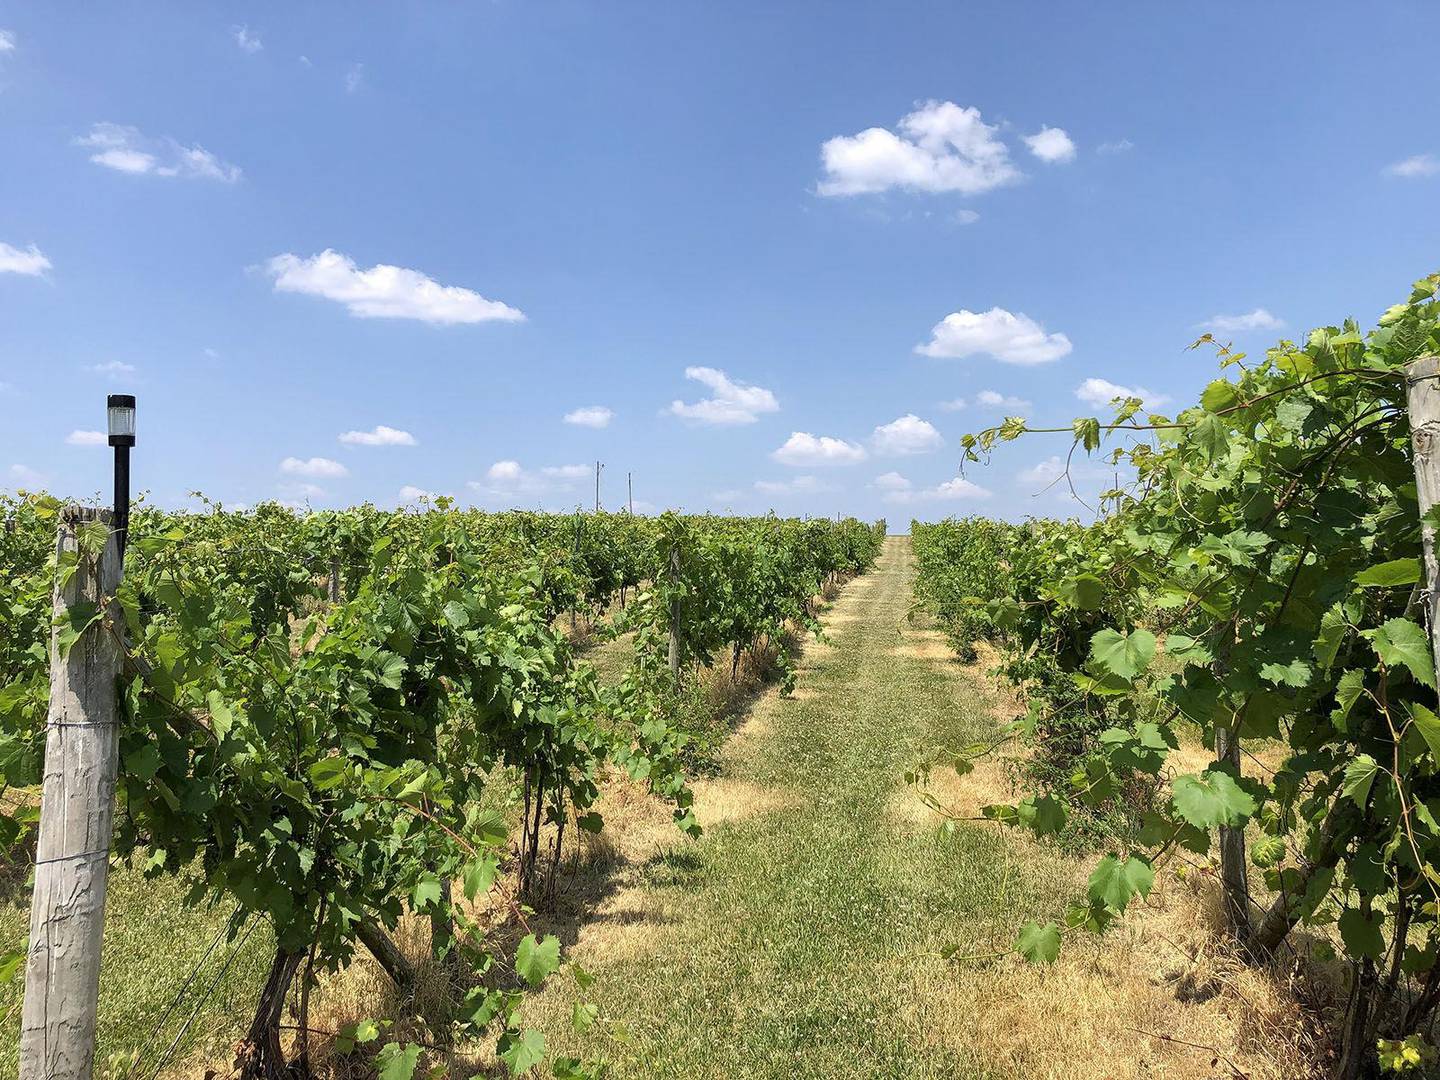 Mackinaw Valley Vineyard features about 15 acres of grapes, with about 20 varieties, first planted by the late Paul Hahn nearly 25 years ago.